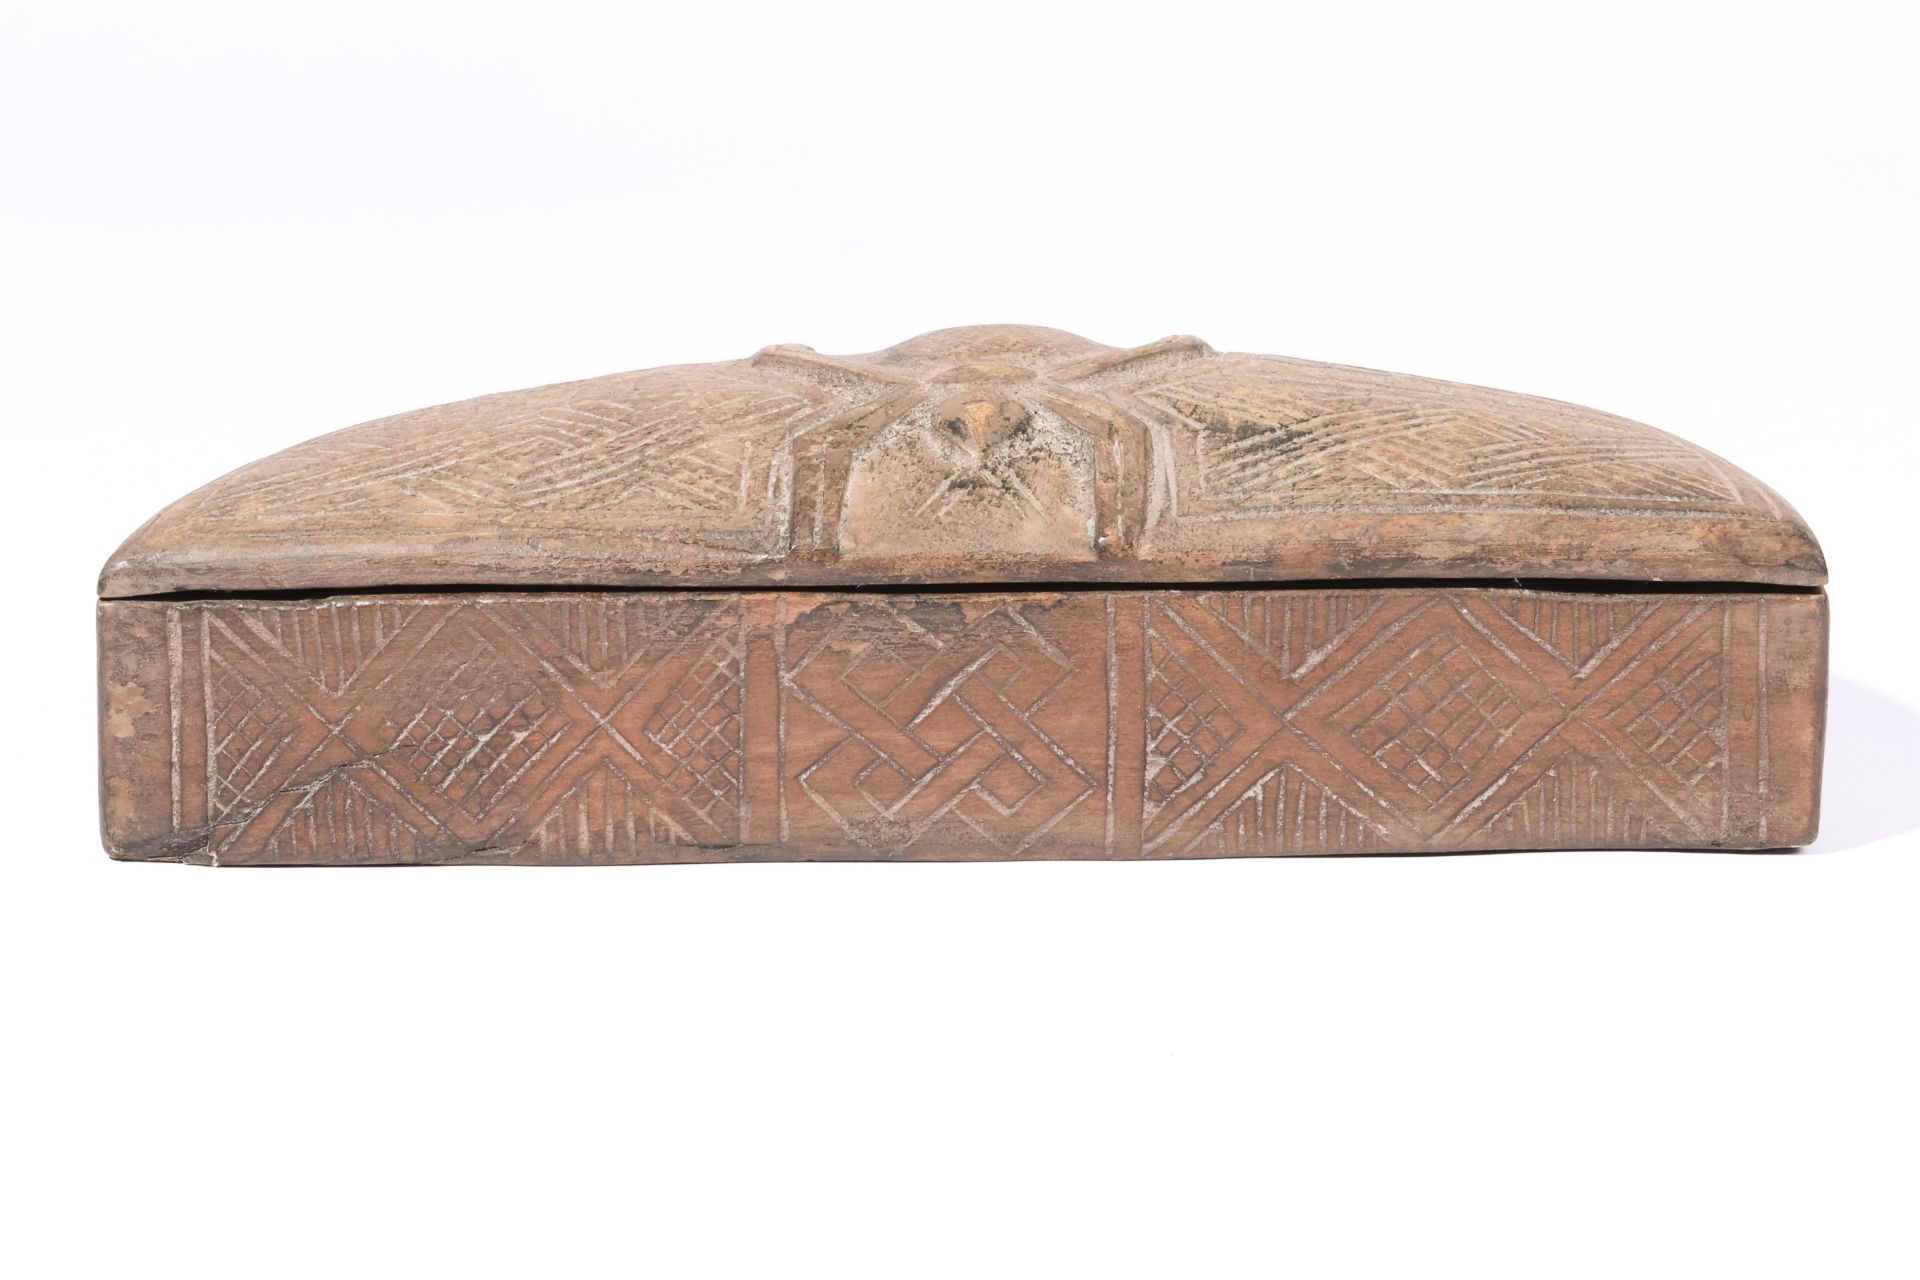 D.R. Congo, Kuba, cosmetics lidded box, the lid ornamented with a spider - Image 2 of 3